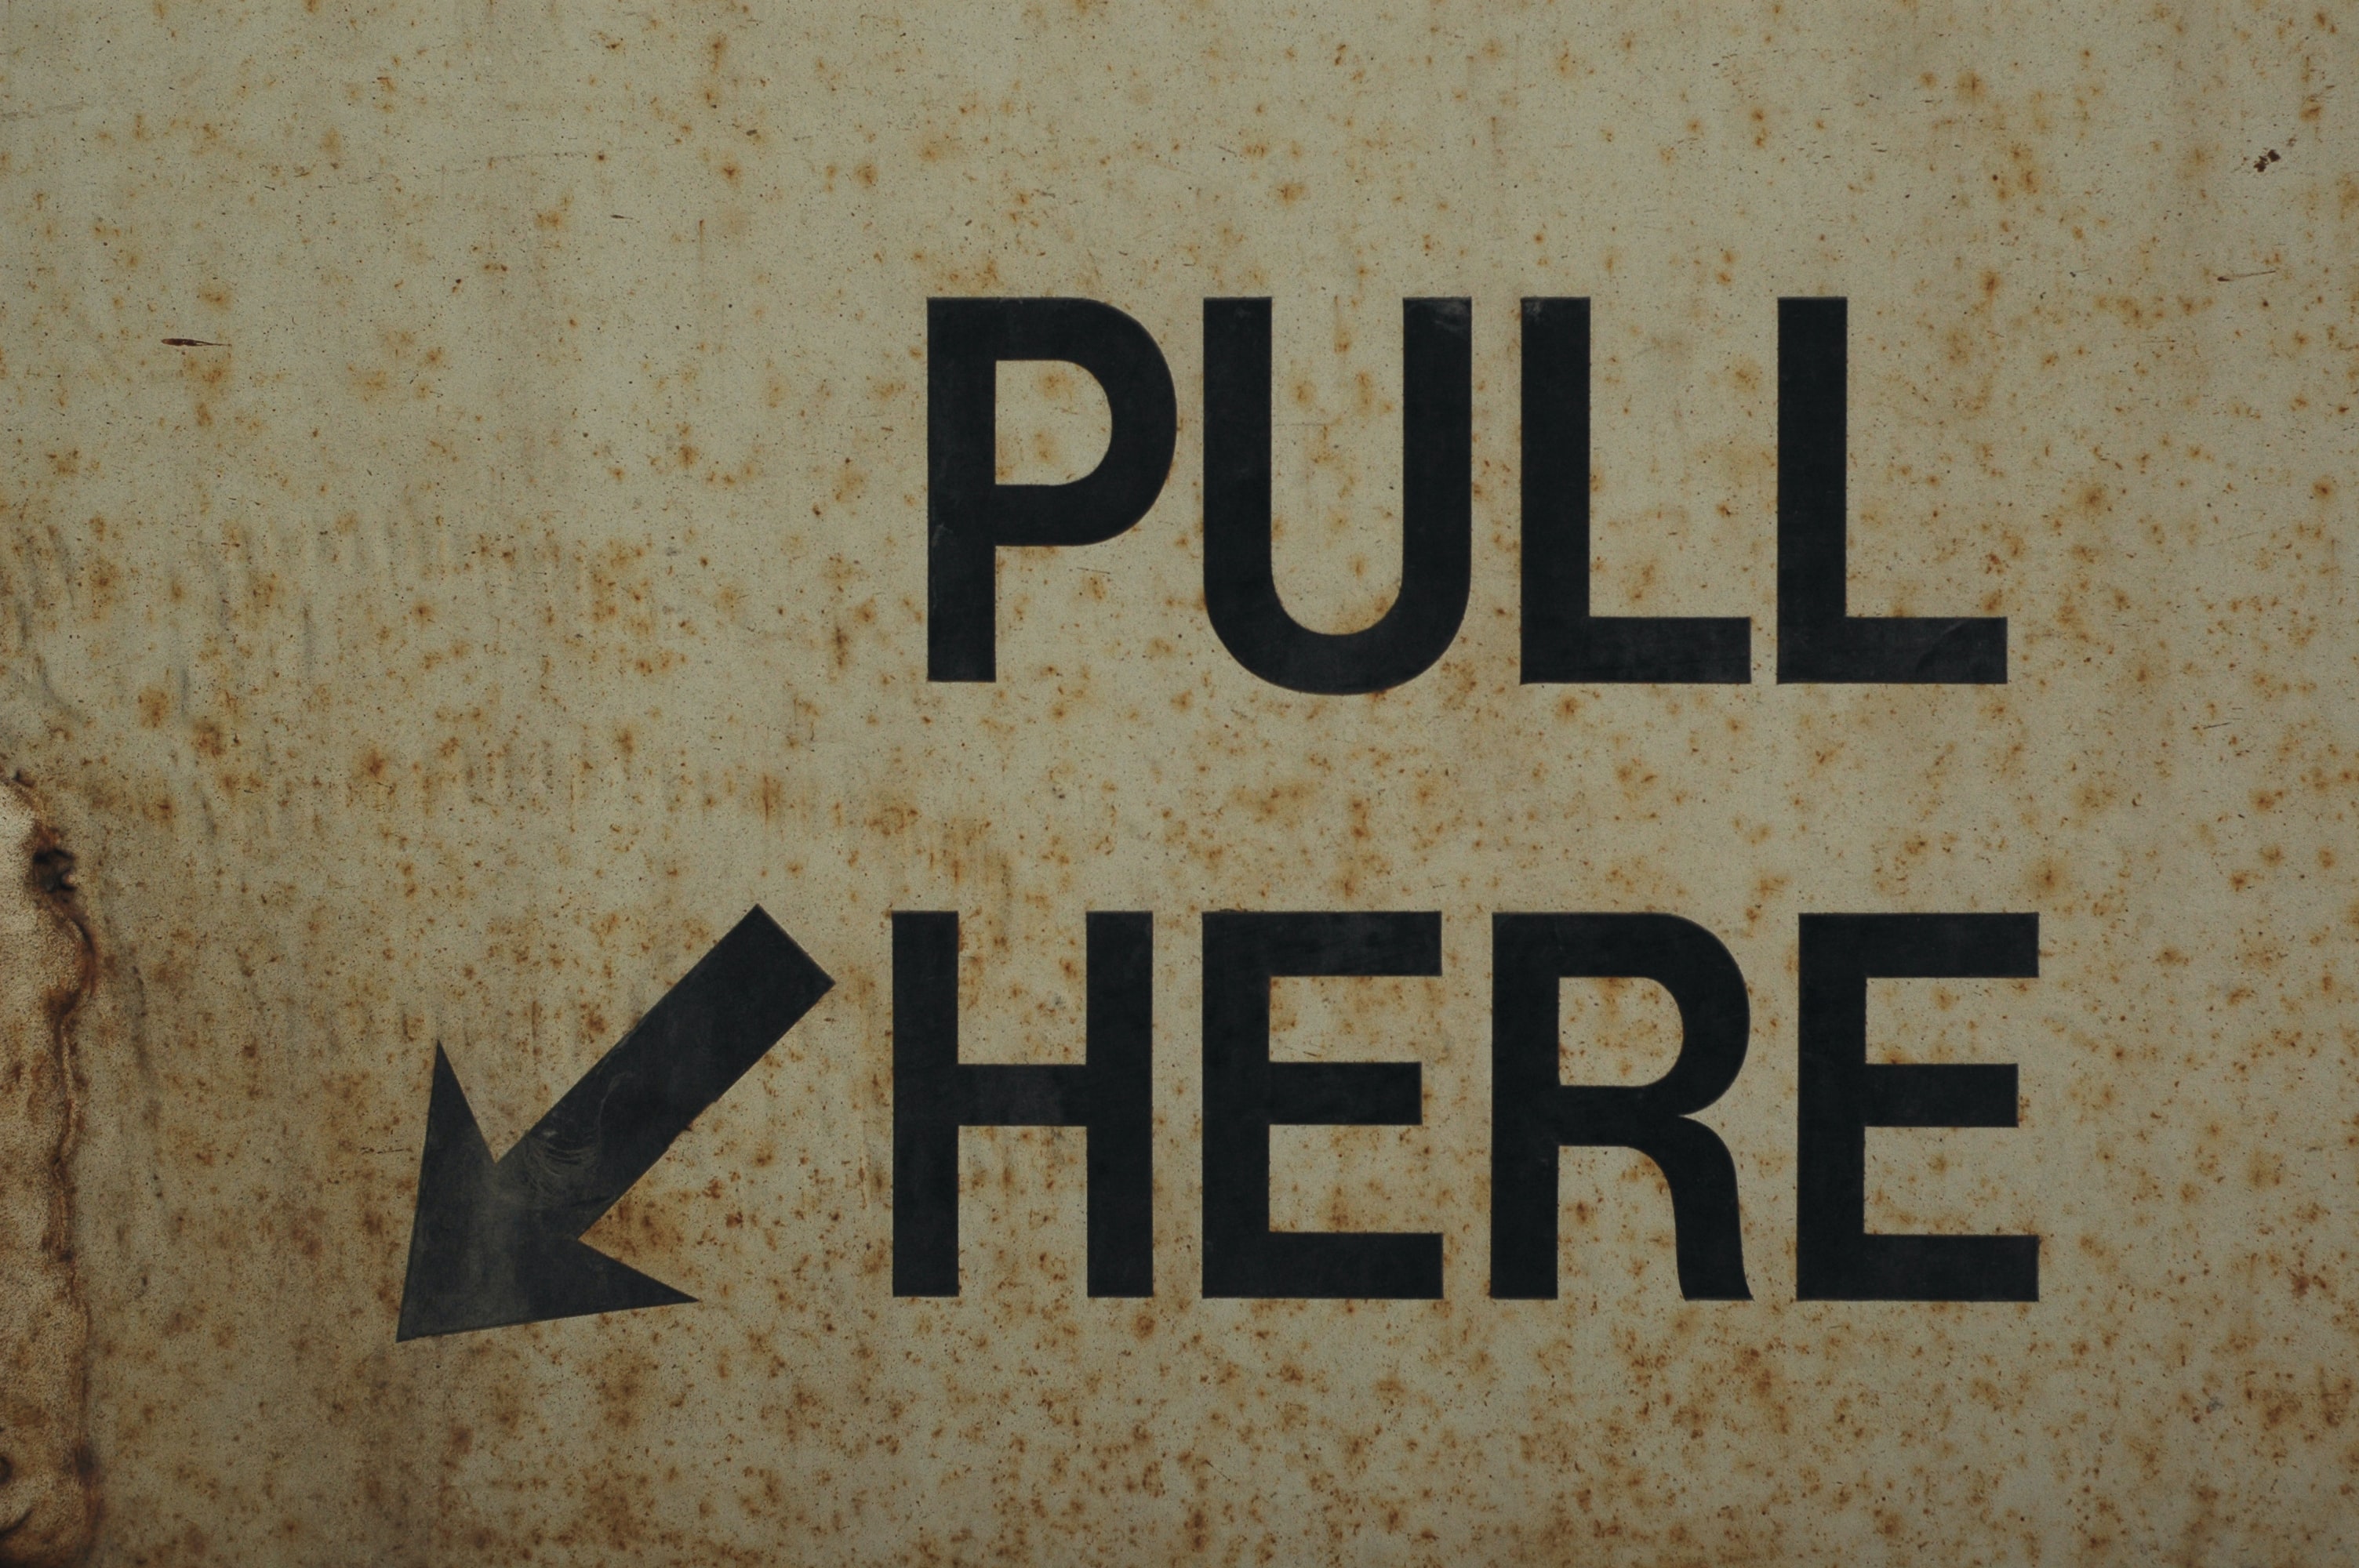 Image with examples of signifiers on a door. A "Pull Here" text and an arrow pointing to a handler.